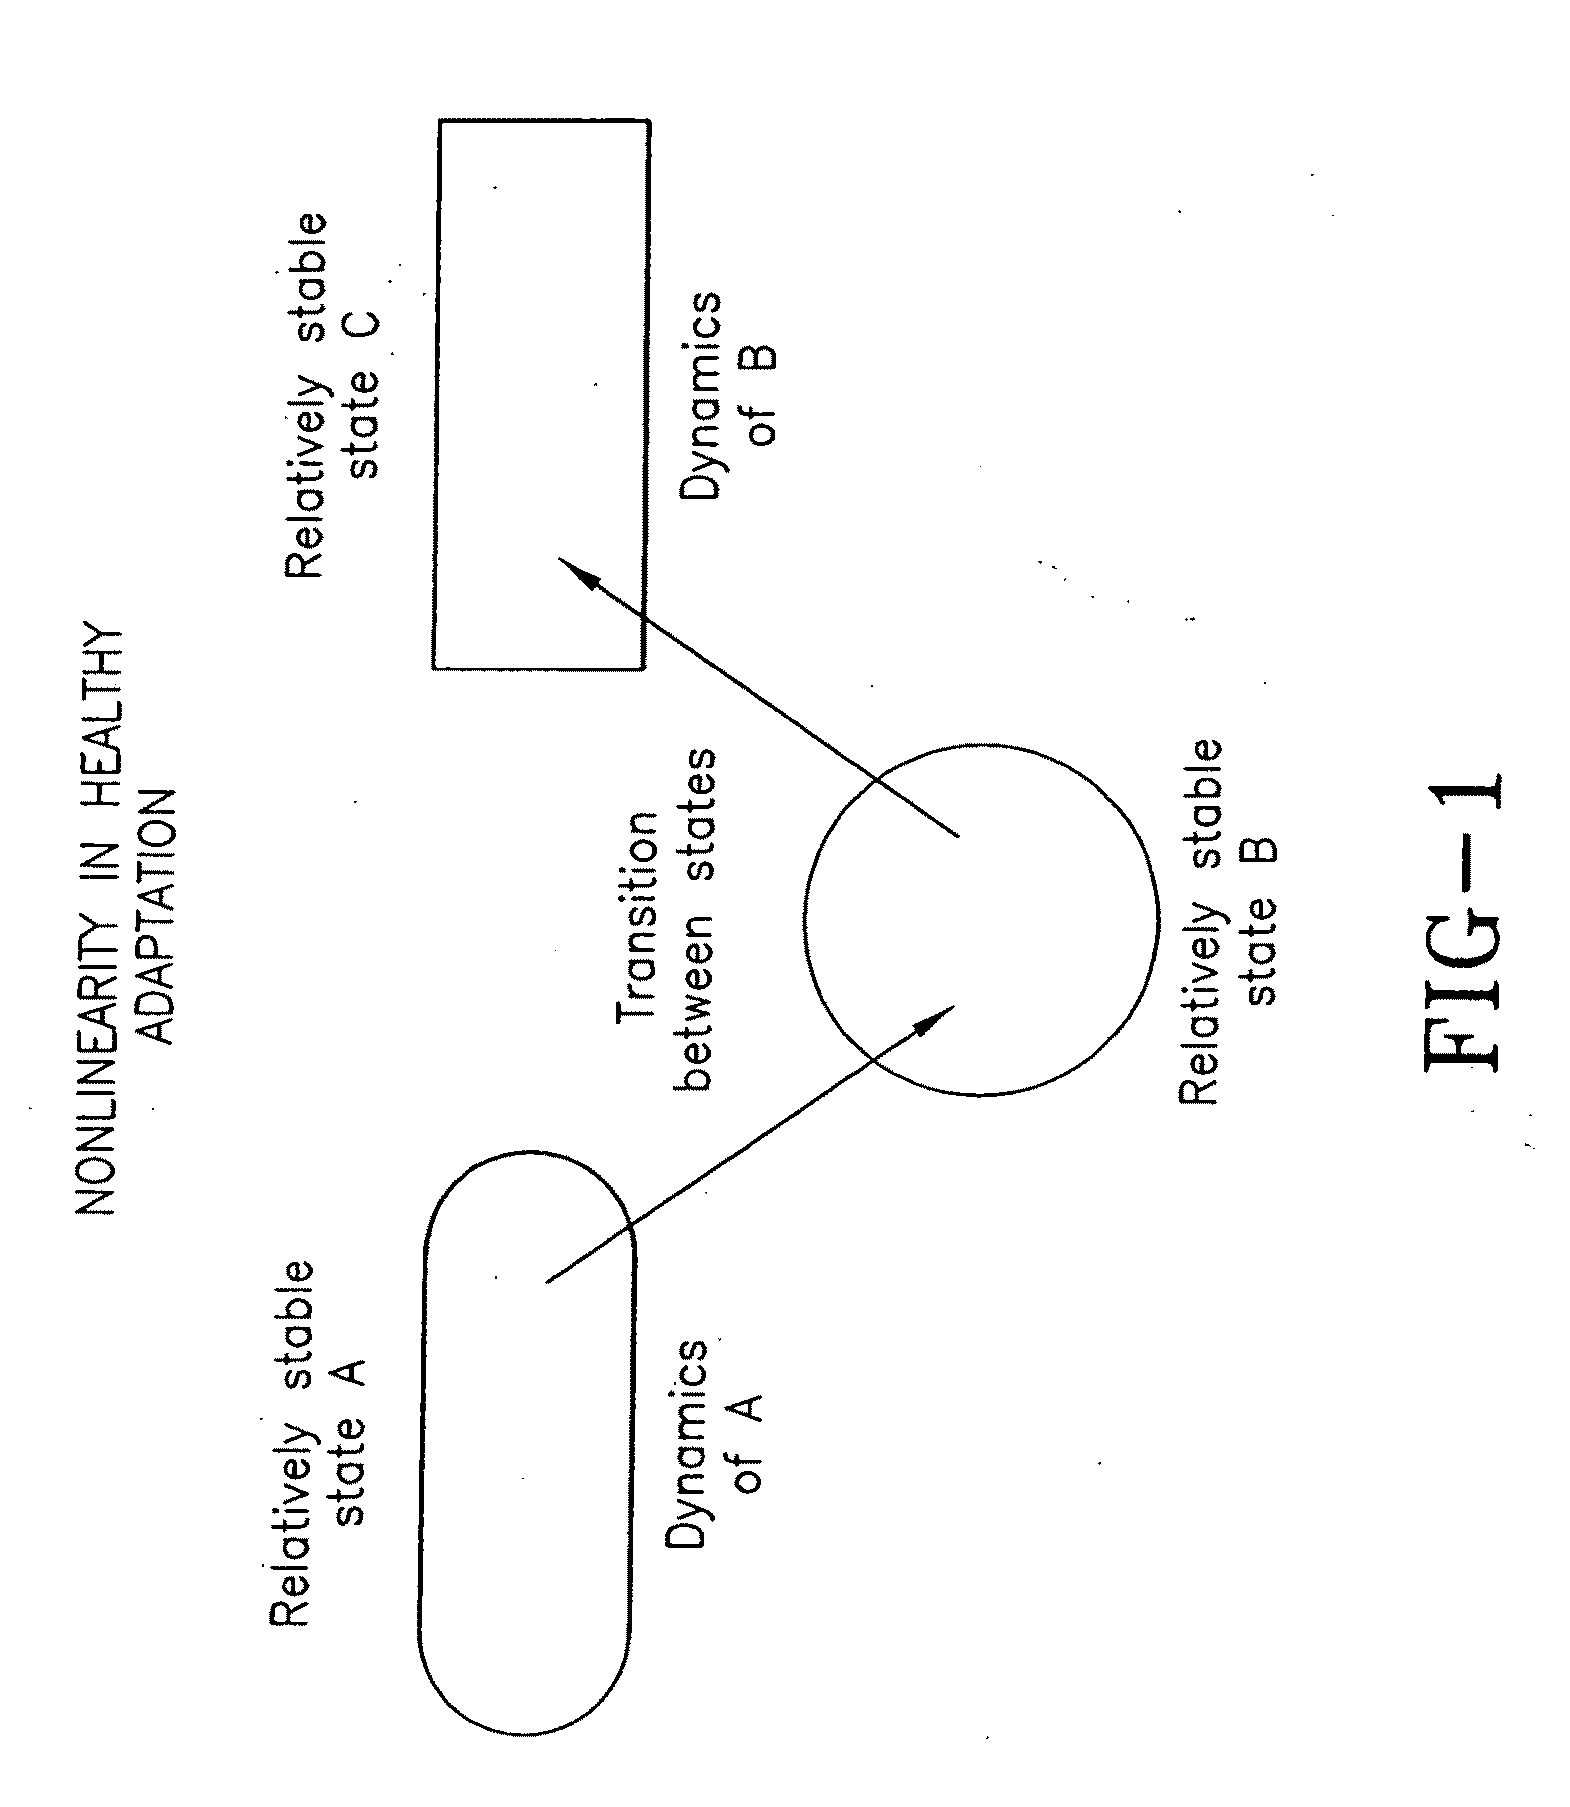 Method and Apparatus for Analysis of Psychiatric and Physical Conditions